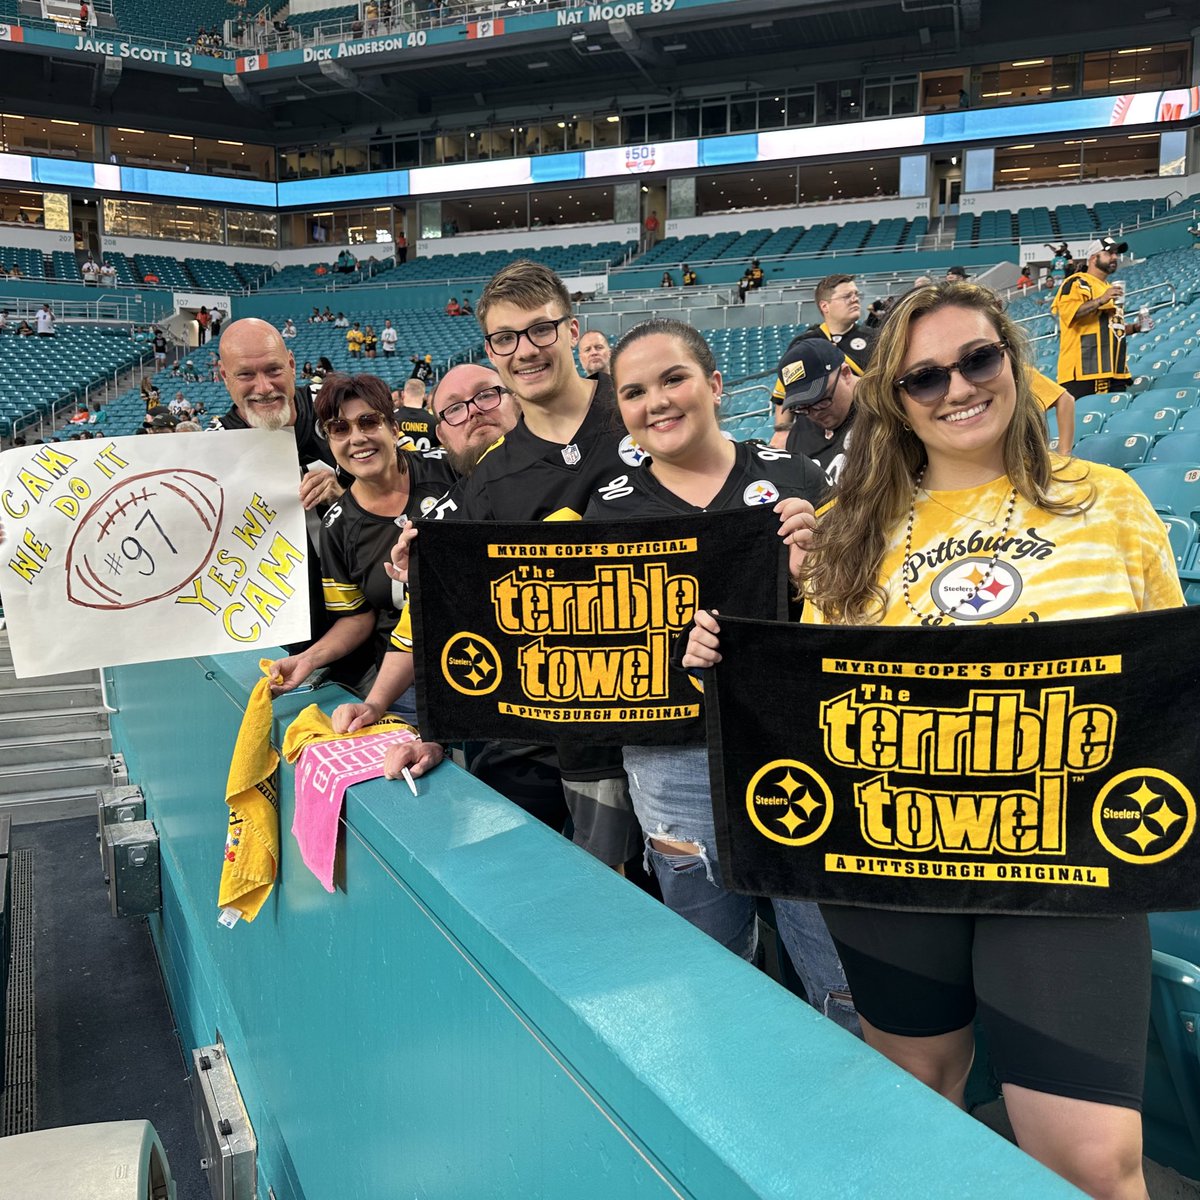 #SteelersNation is in the 305 ready to see the #Steelers take on the Dolphins! #HereWeGo | #SNUProud